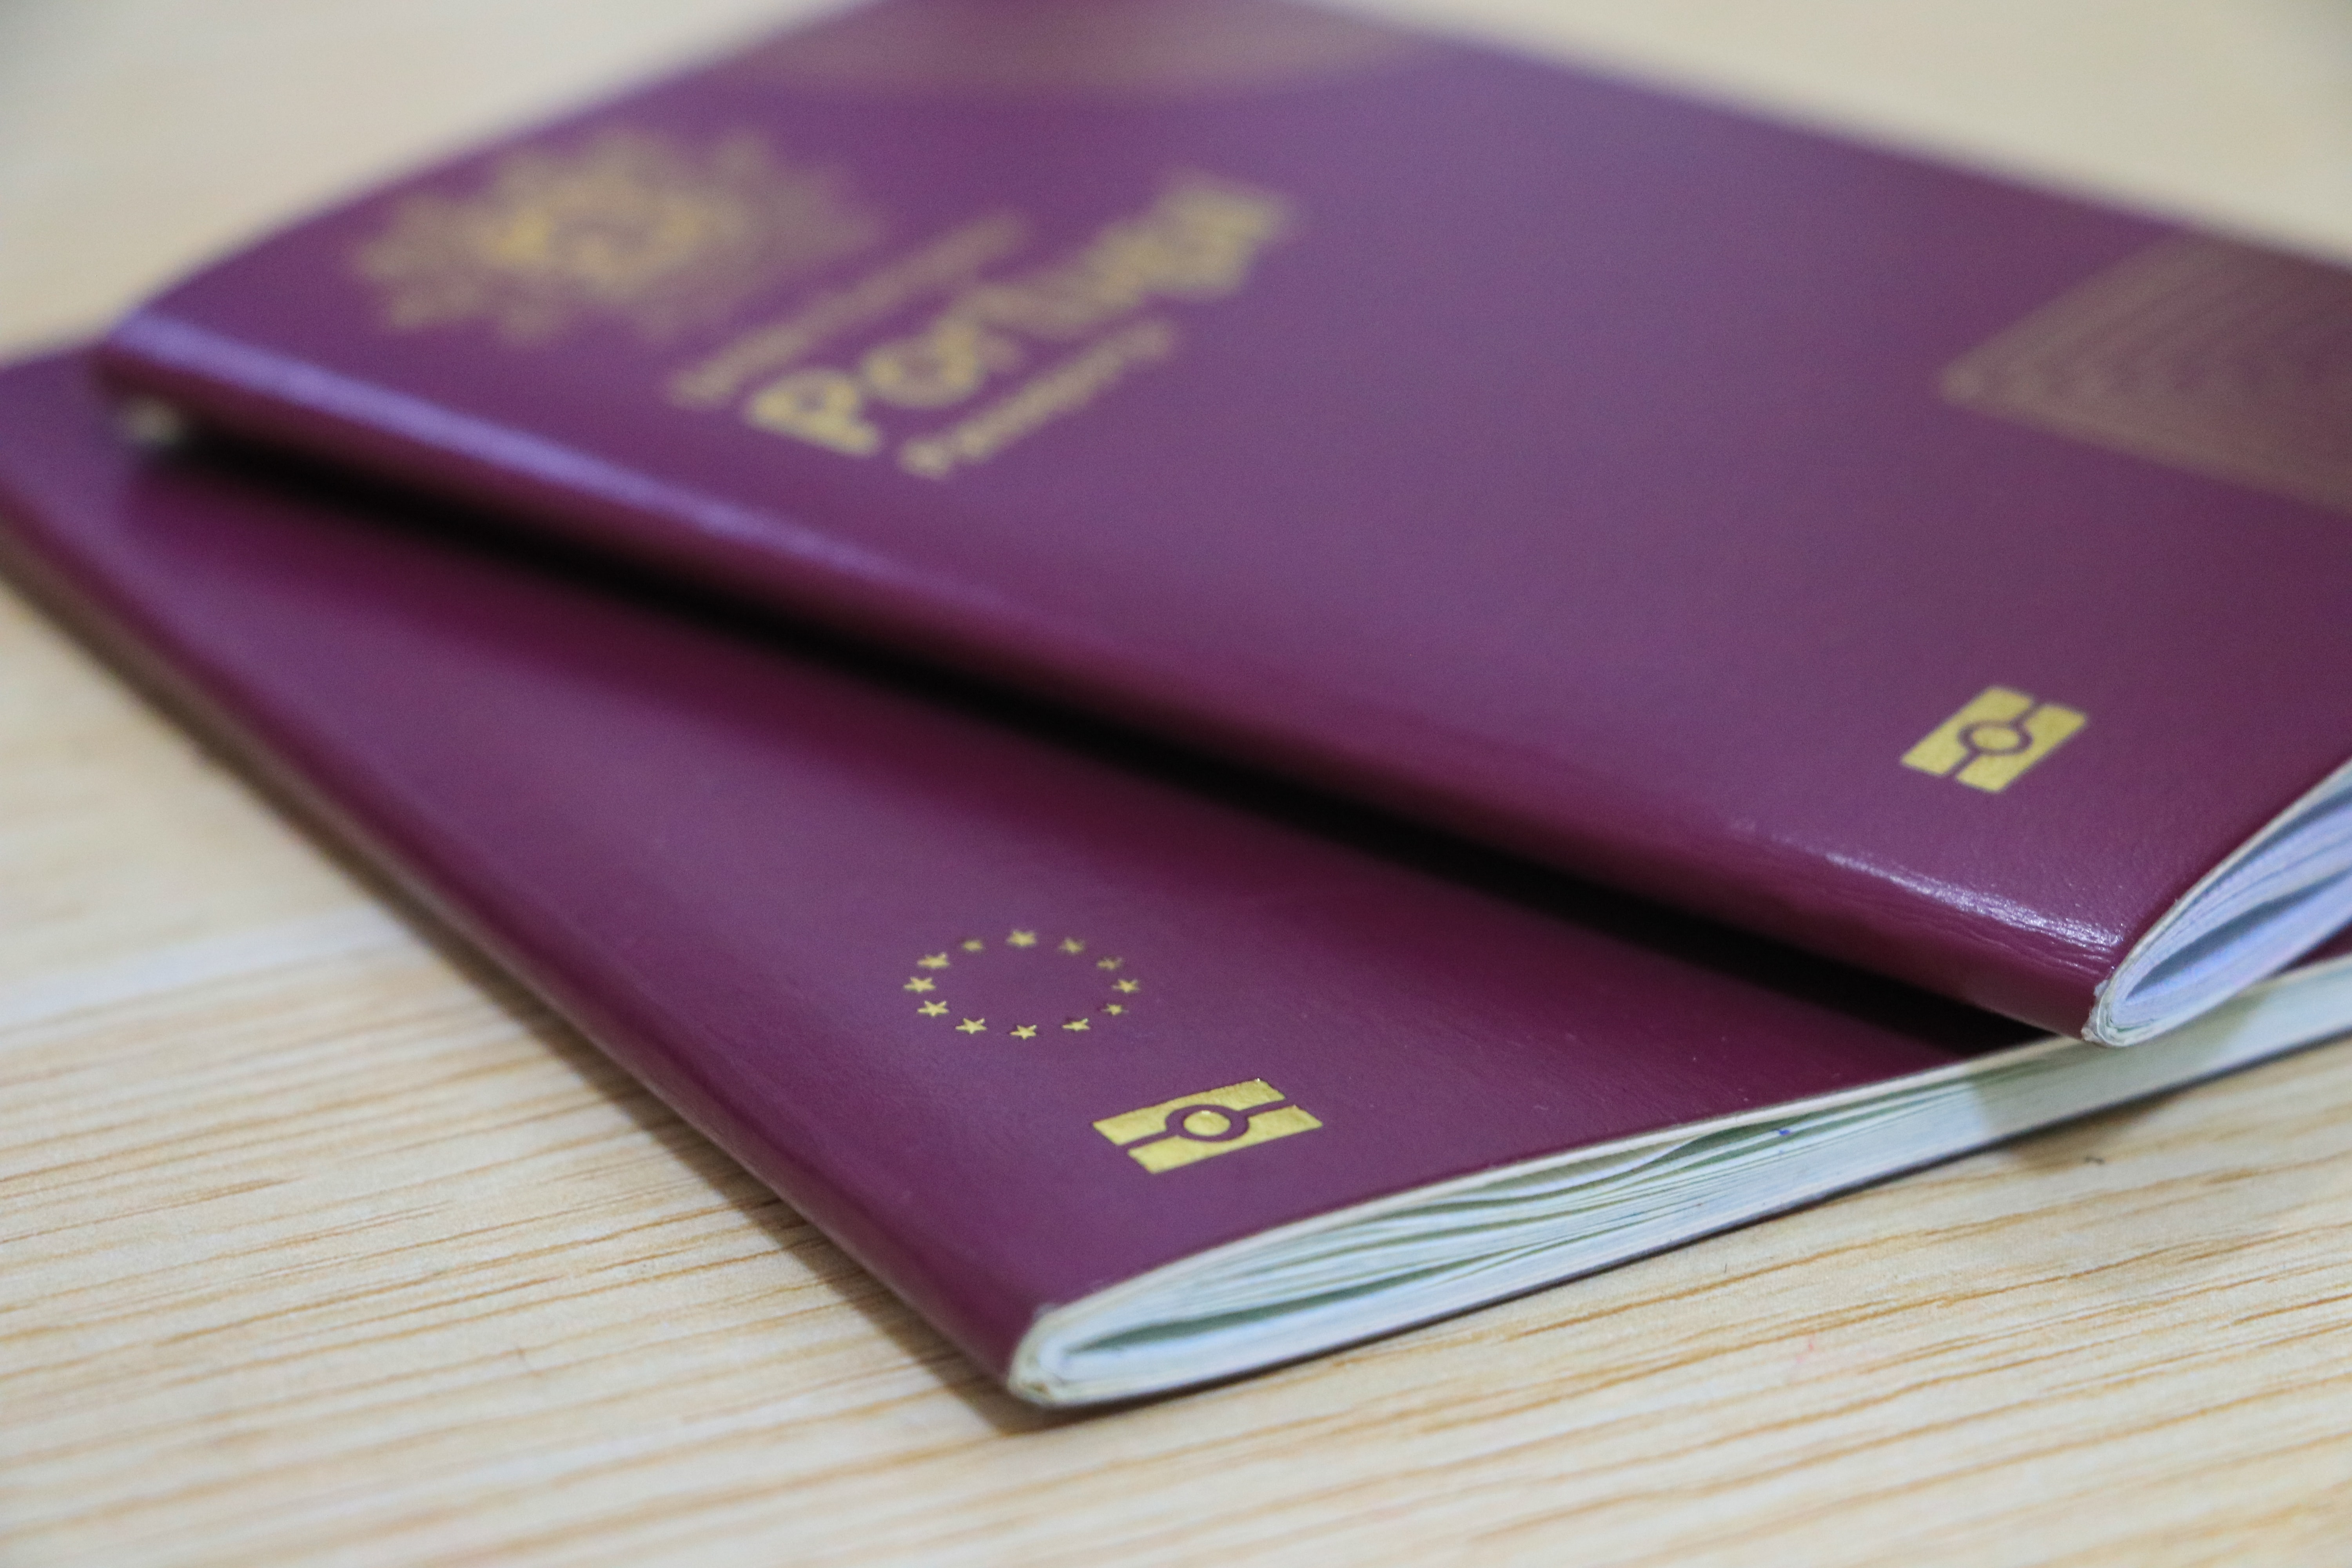 IRN is now responsible for passports and residence permit renewals